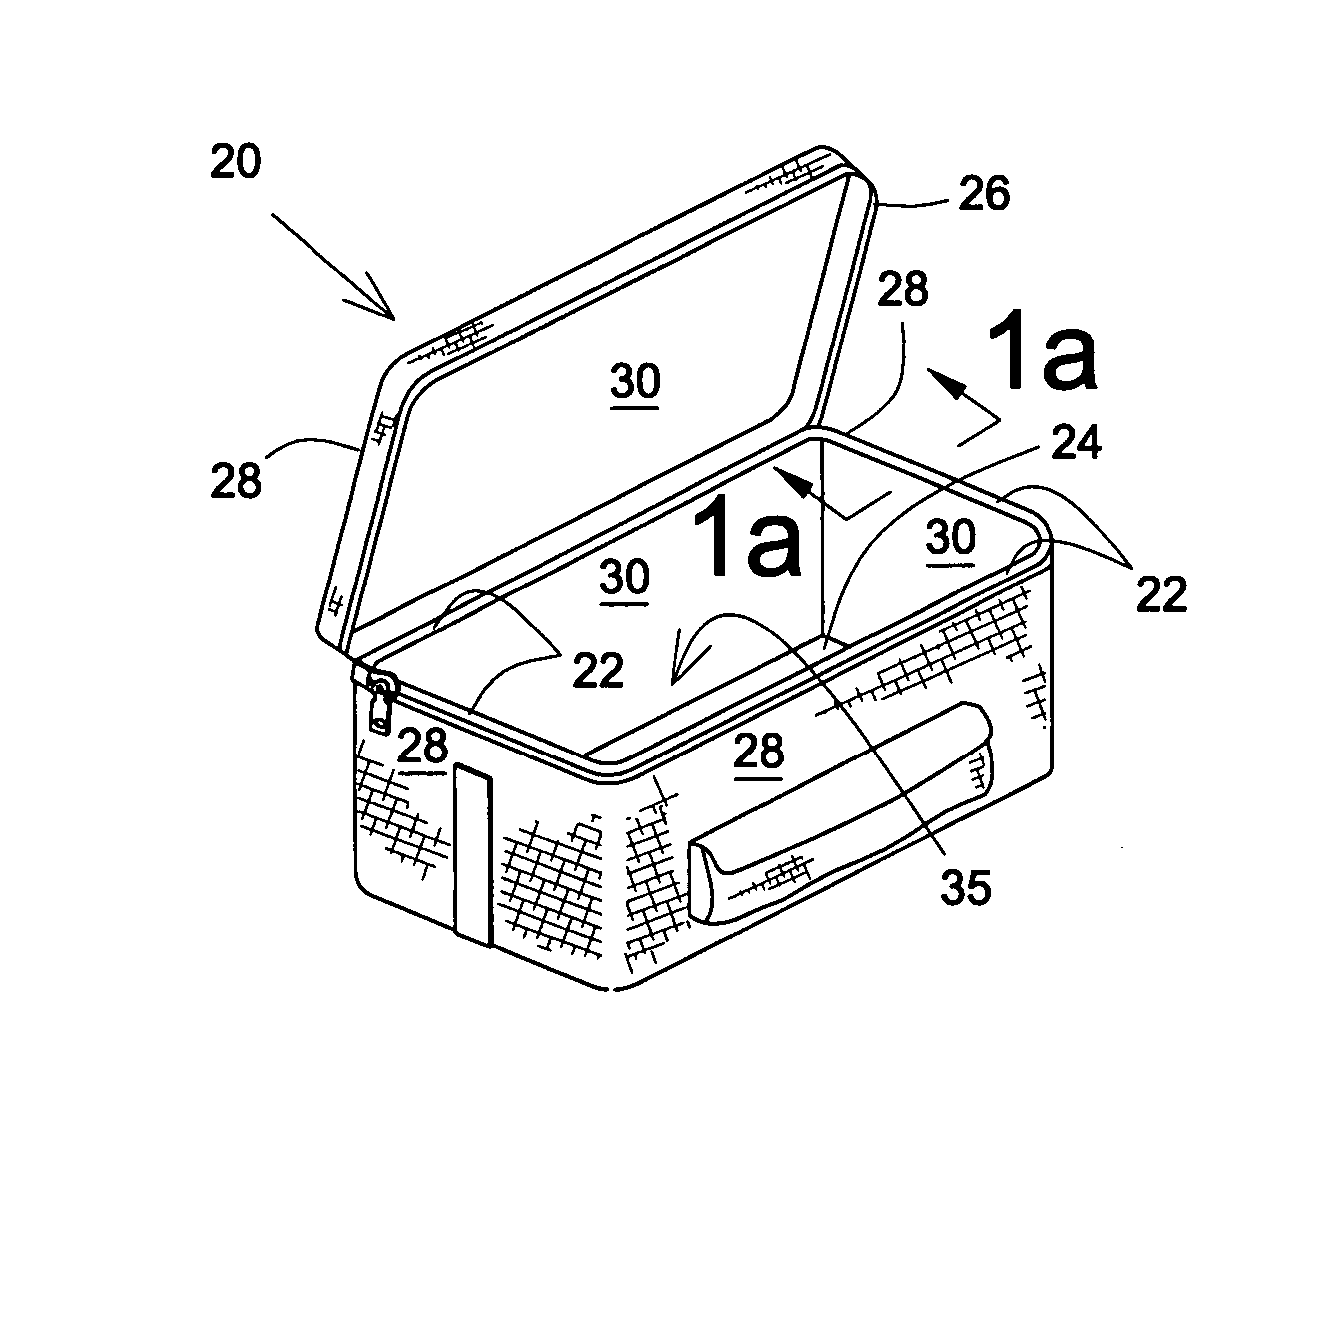 Self-contained gel insulated container